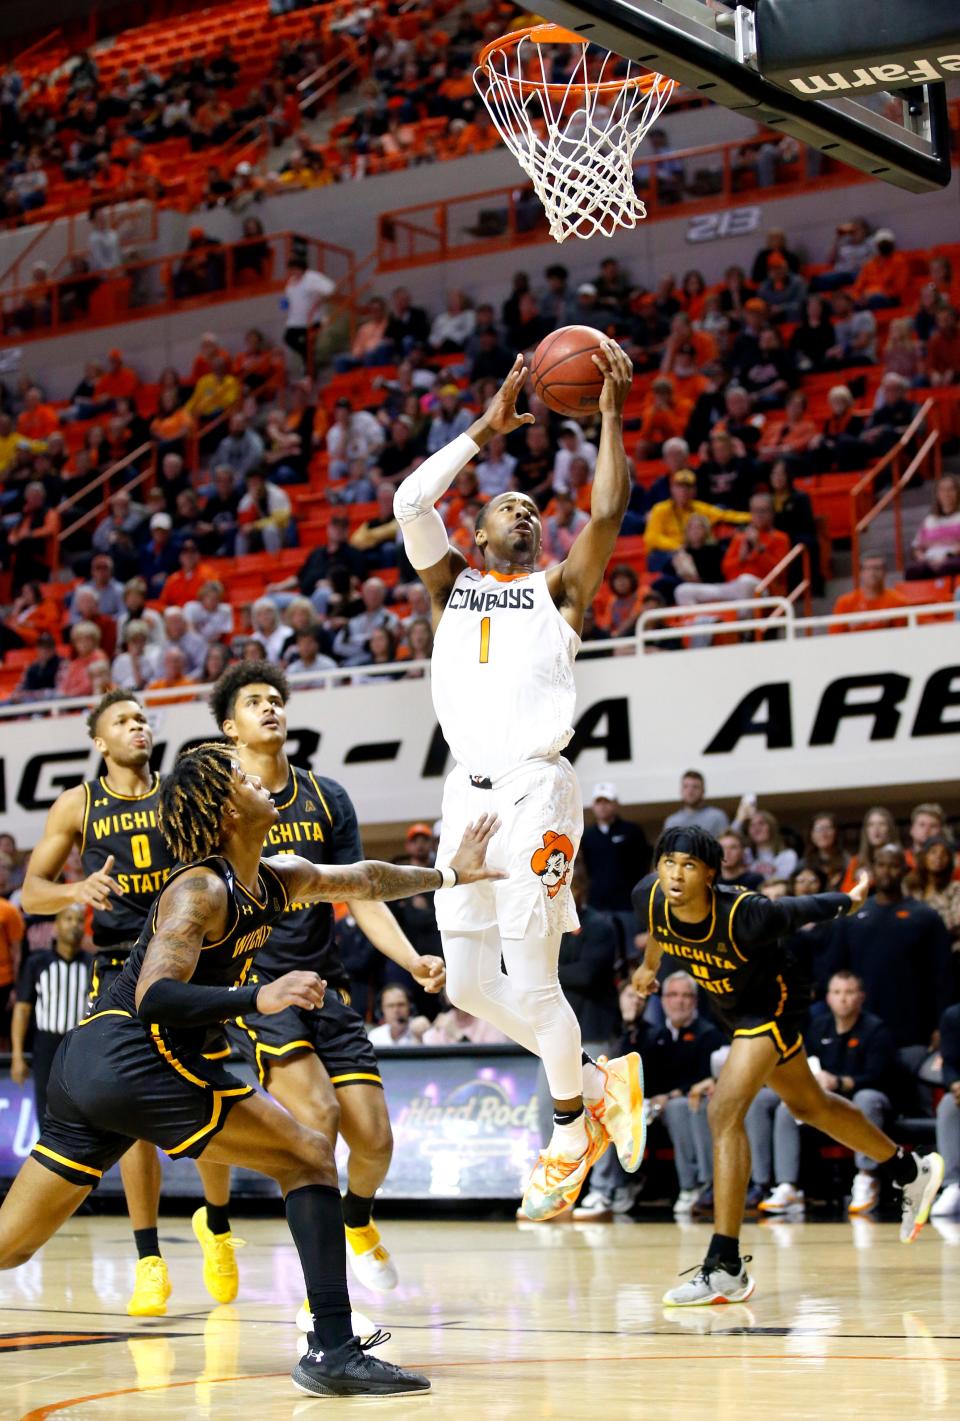 Oklahoma State's Avery Anderson III (0) goes up for a lay up in the second half during the college basketball game between the Oklahoma State Cowboys and the Wichita State Shockers at Gallagher-Iba Arena, Wednesday, Dec. 1, 2021. 